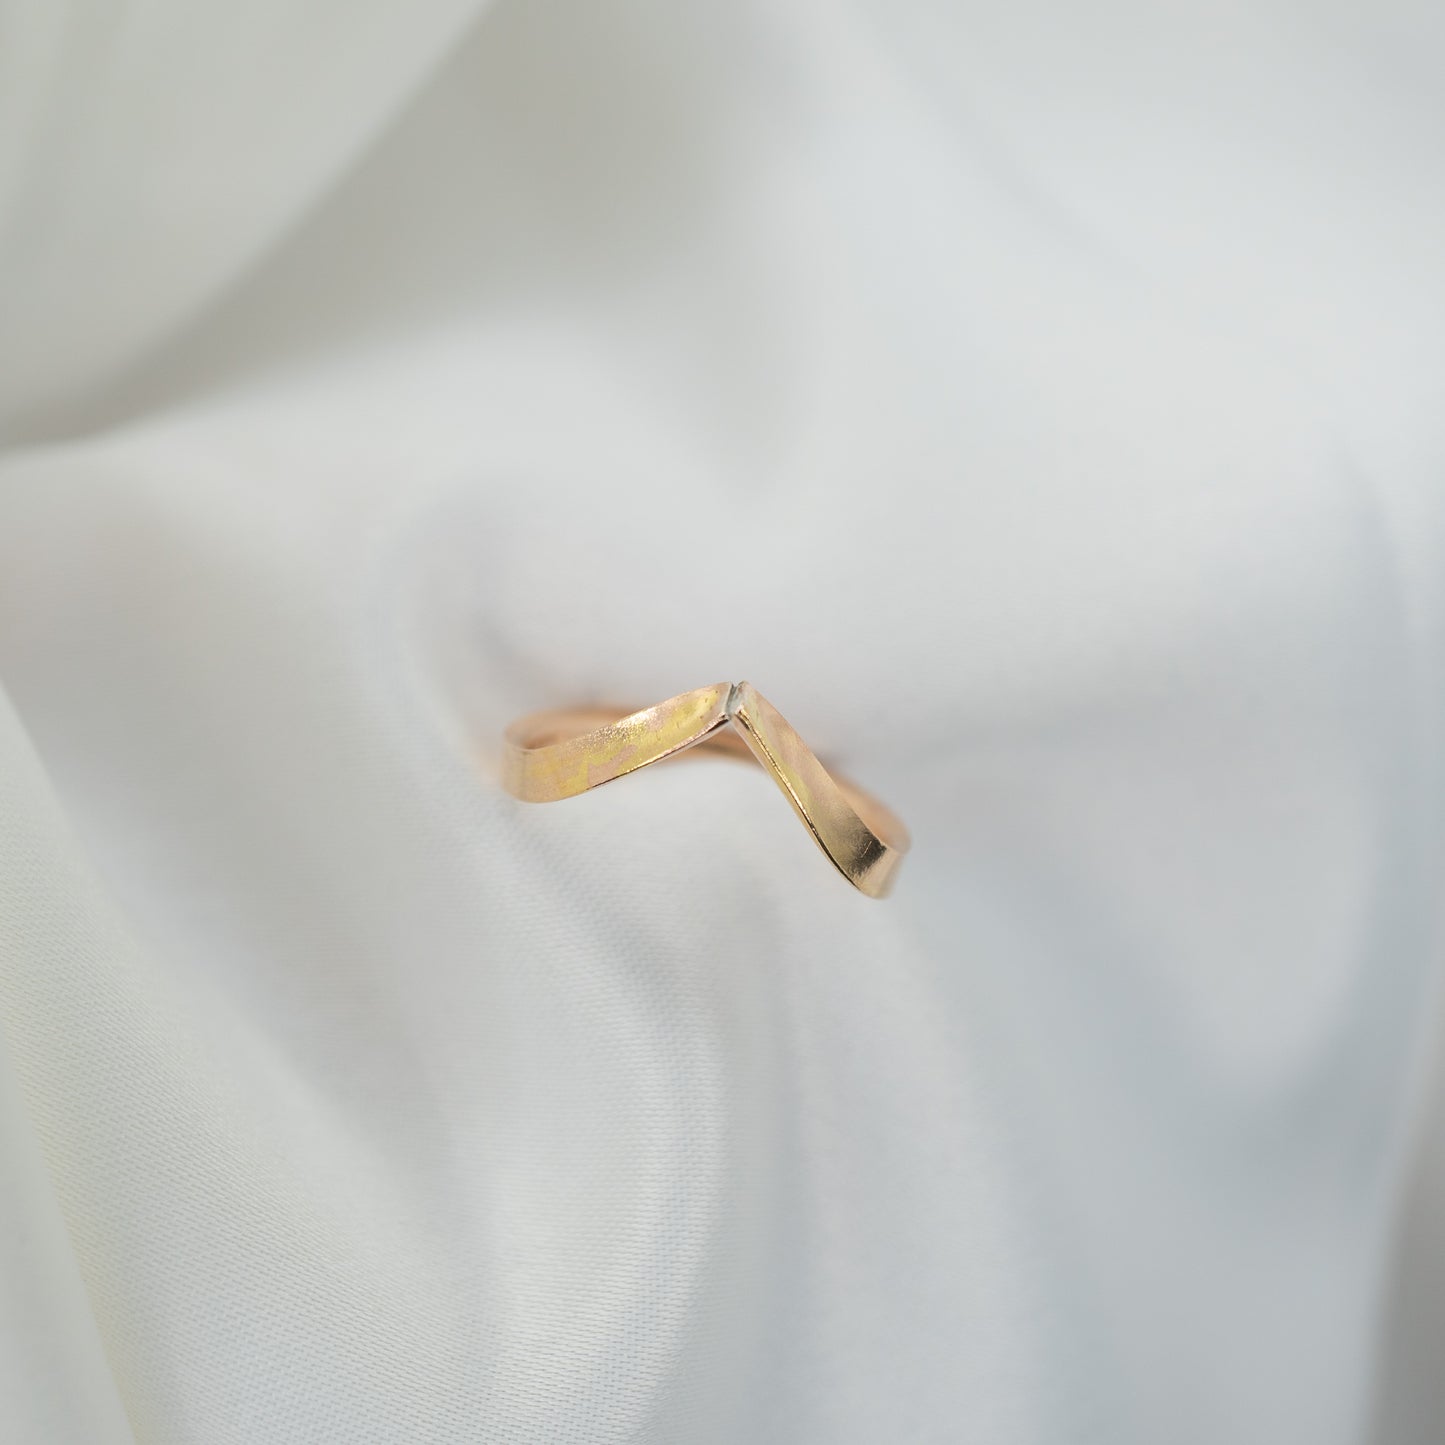 Gold Filled Chevron Ring - shot on white - aerial view